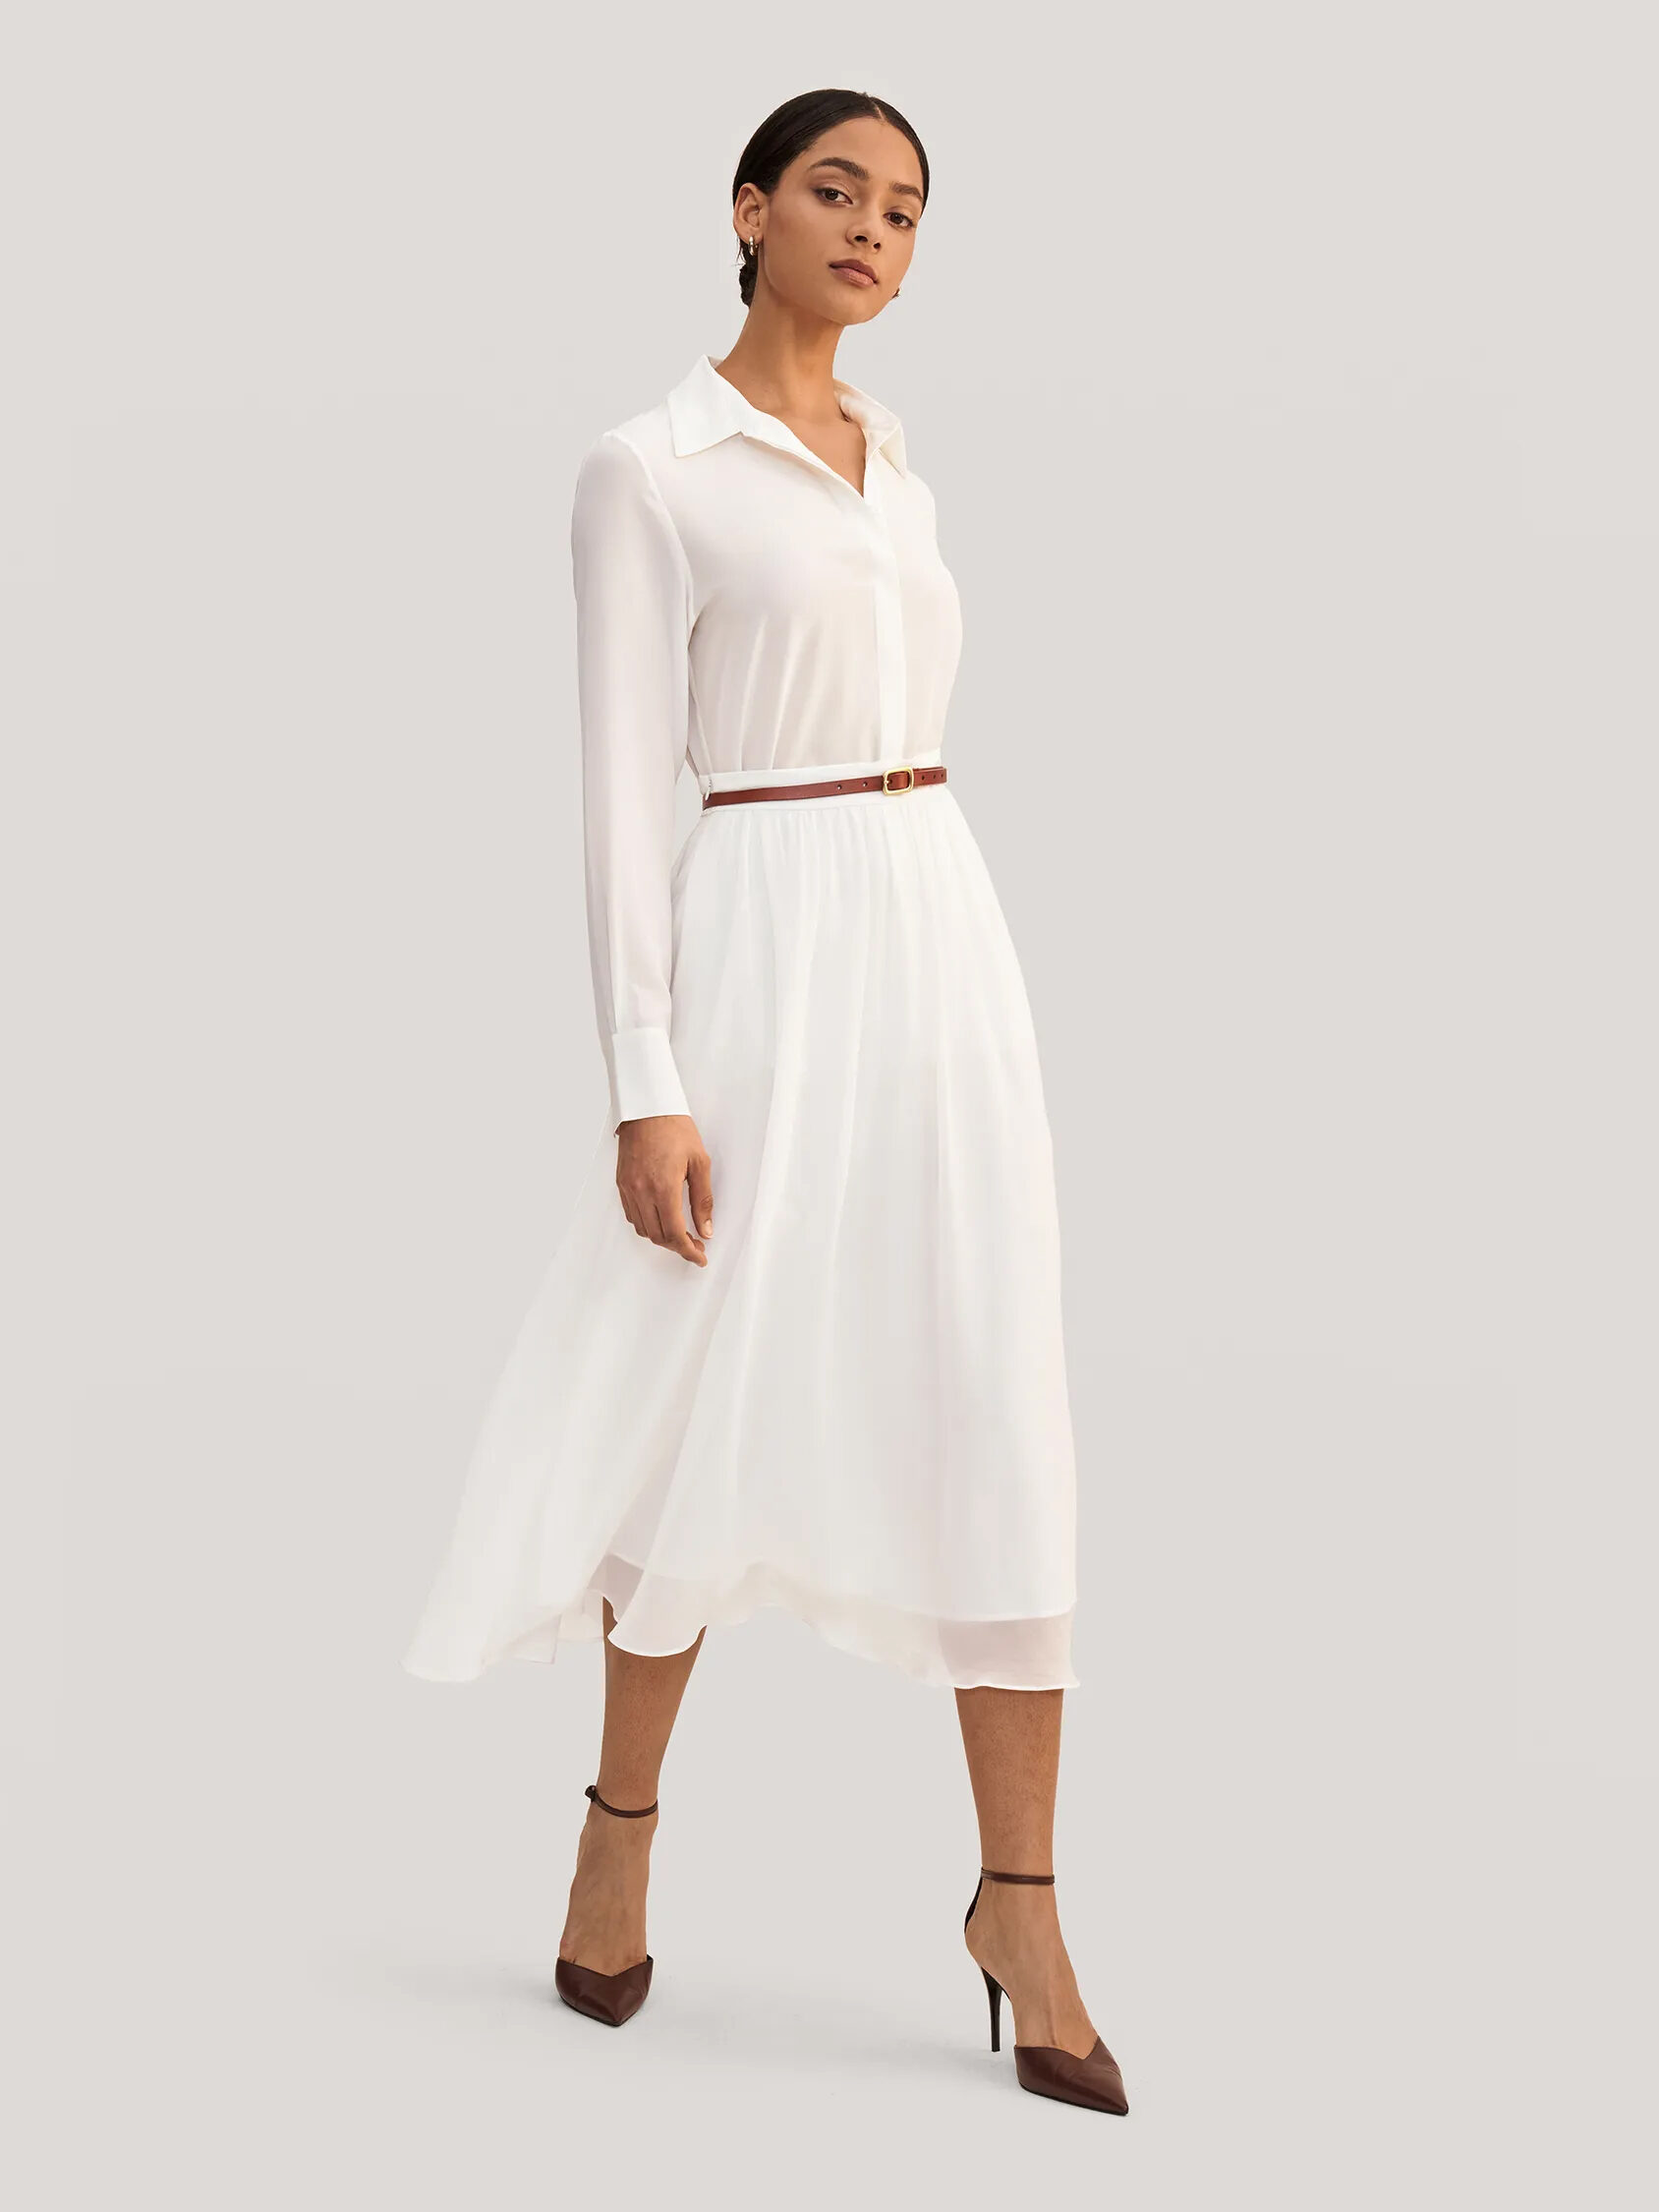 A woman in a white midi dress with a collar and a brown belt, paired with brown high heels.